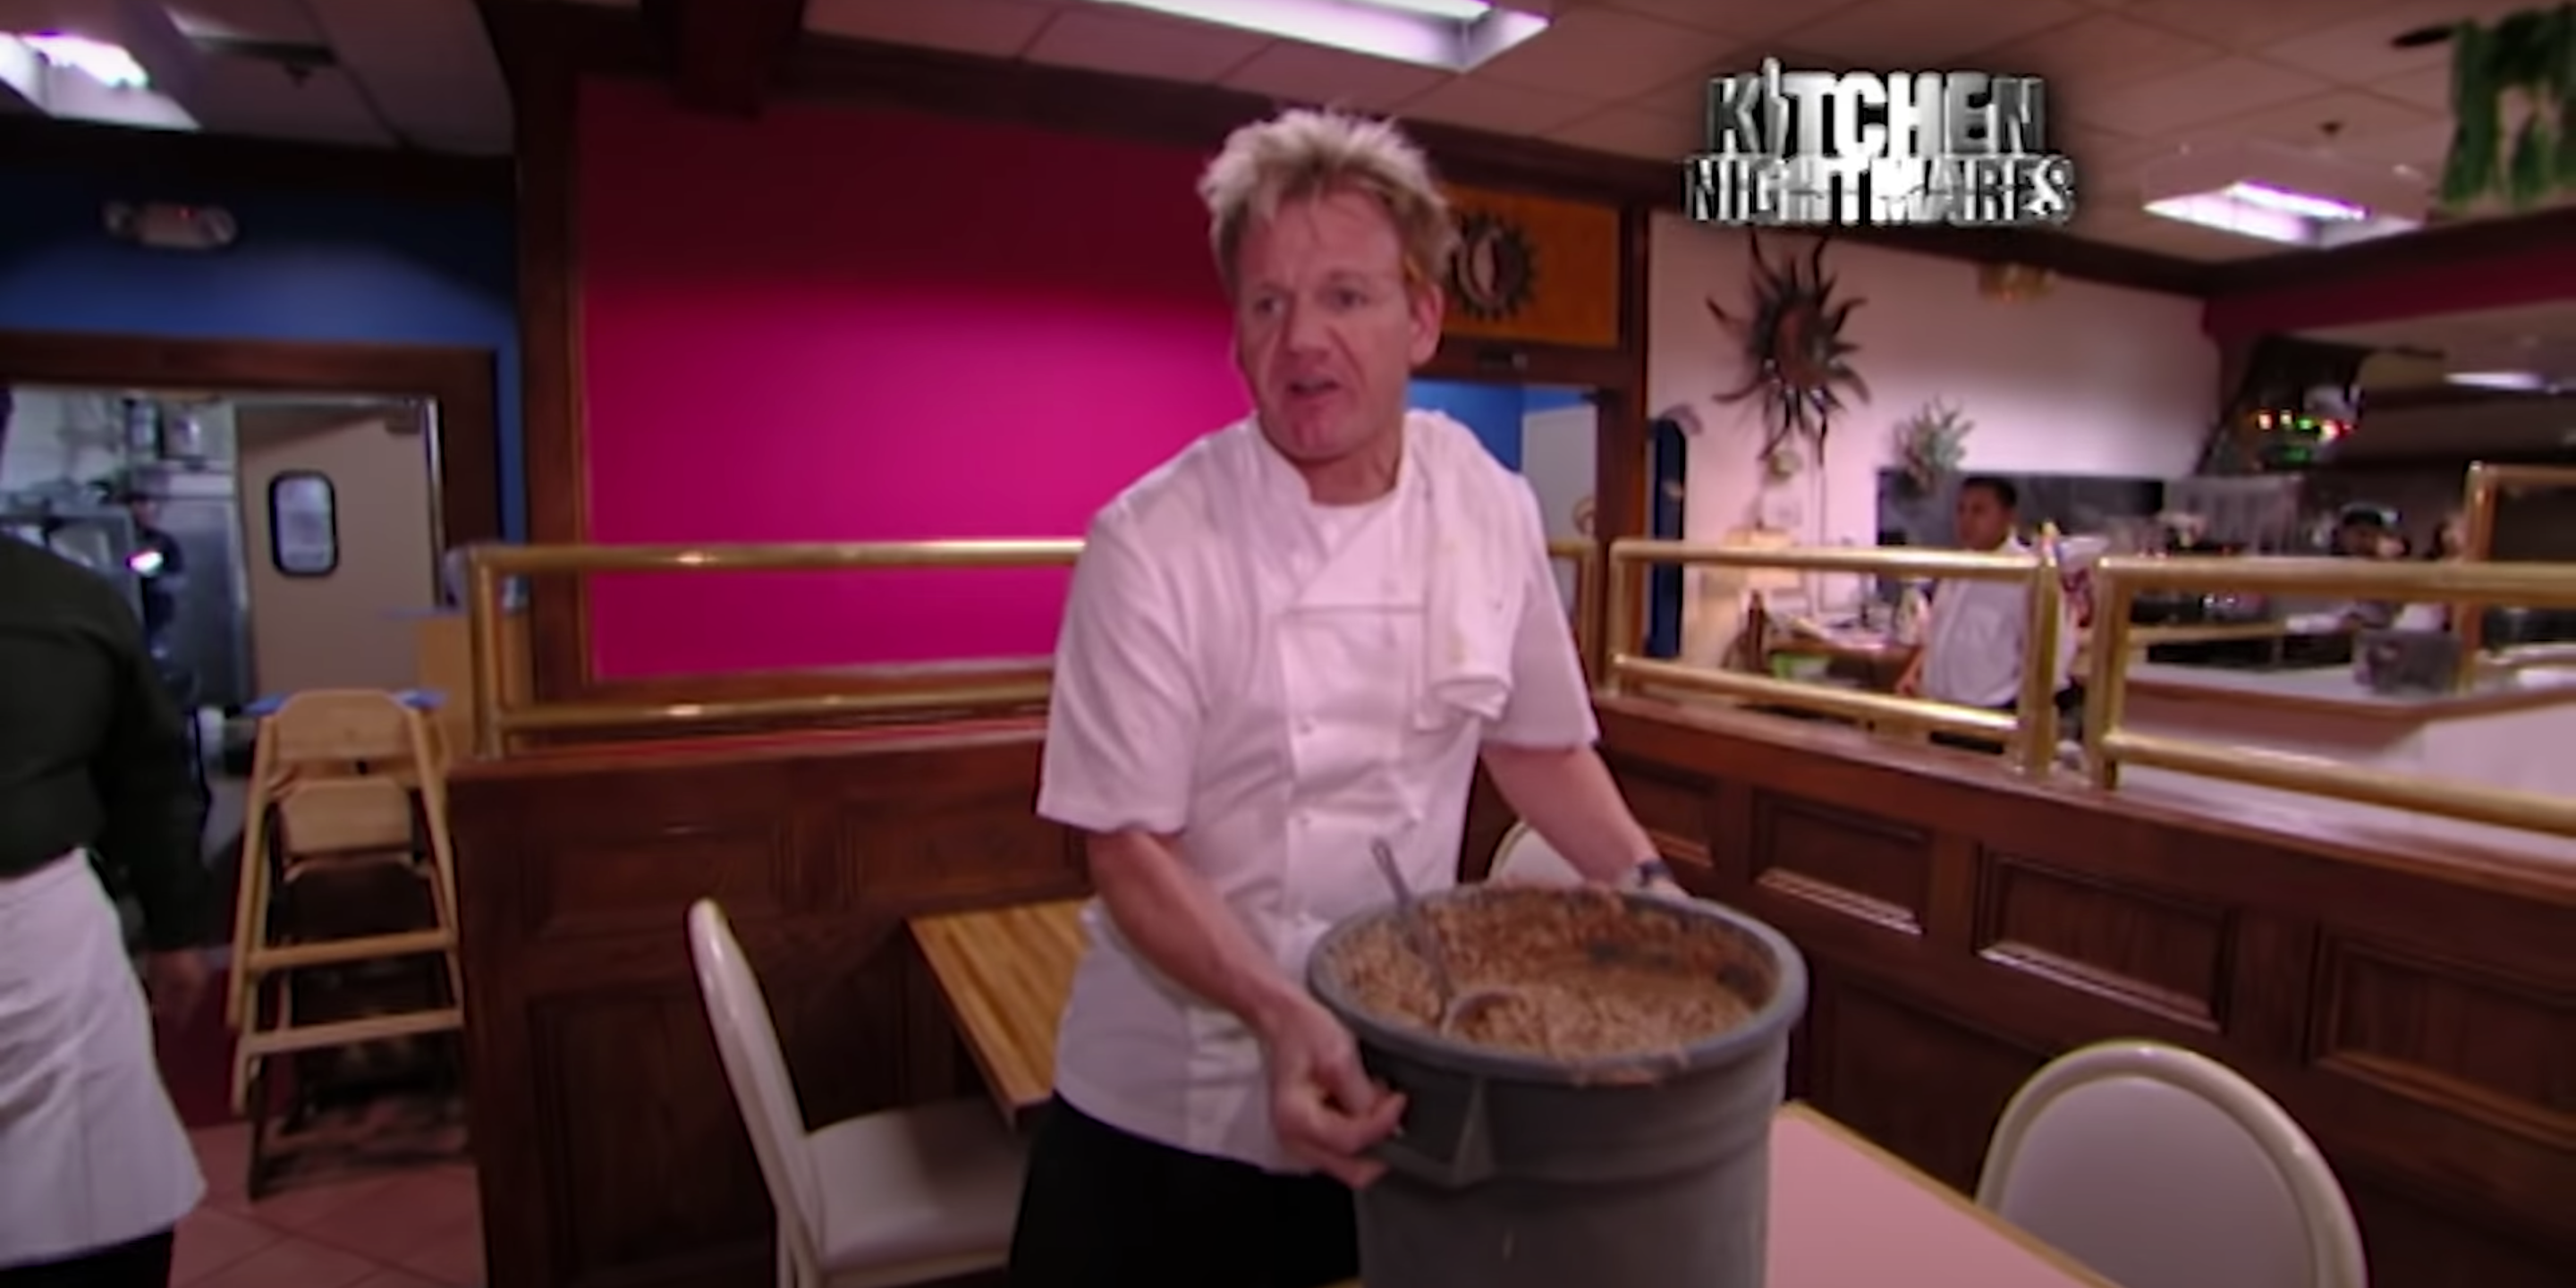 Gordon sets a bucket of expired refried beans onto a table in the dining room of Fiesta Sunrise.